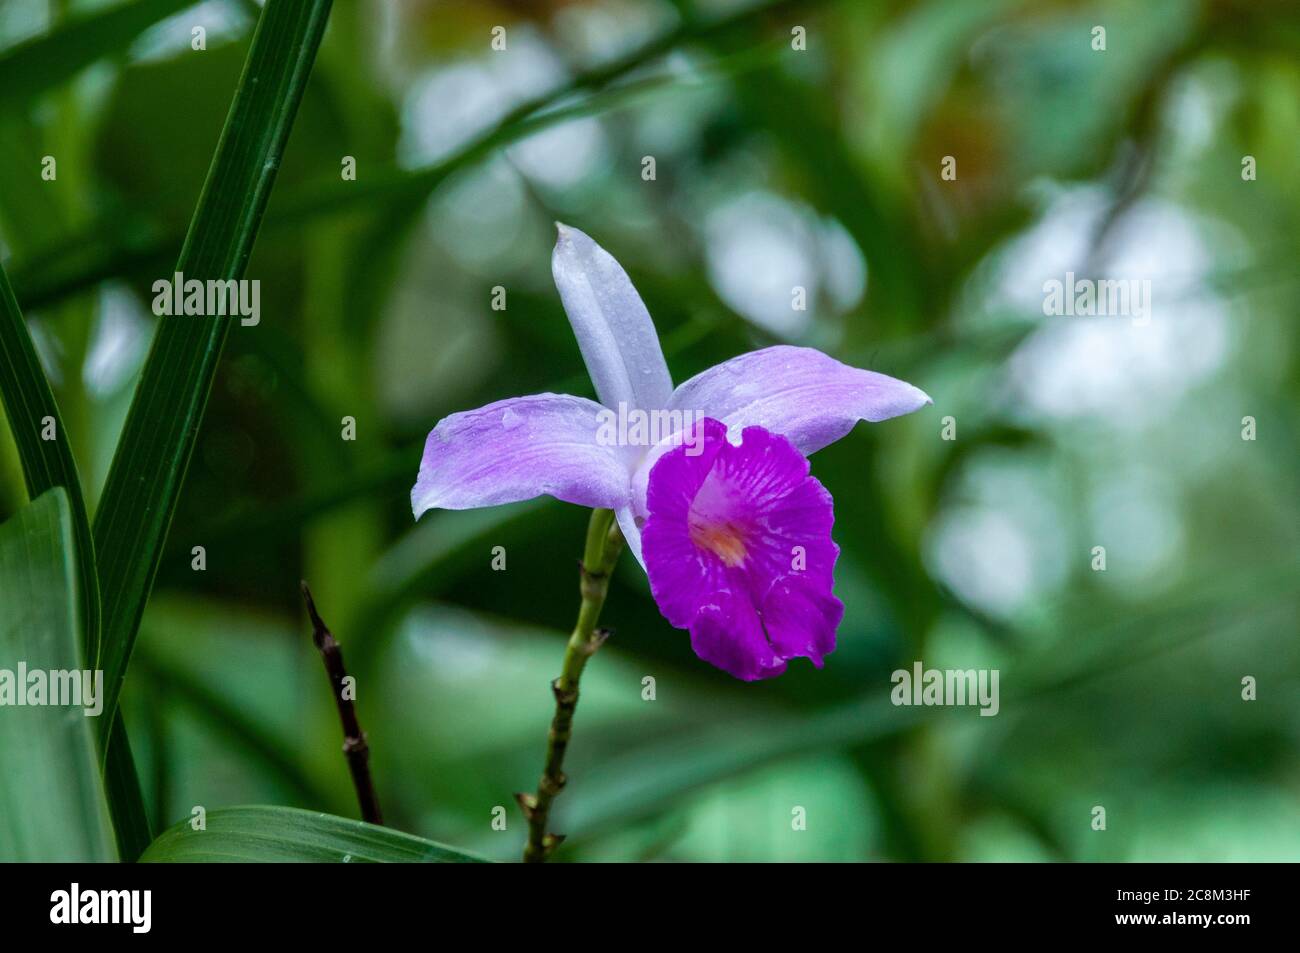 Purple orchid flower, lavender color of wild flower with green background, growing wild in Puerto Limon, Costa Rica. Stock Photo